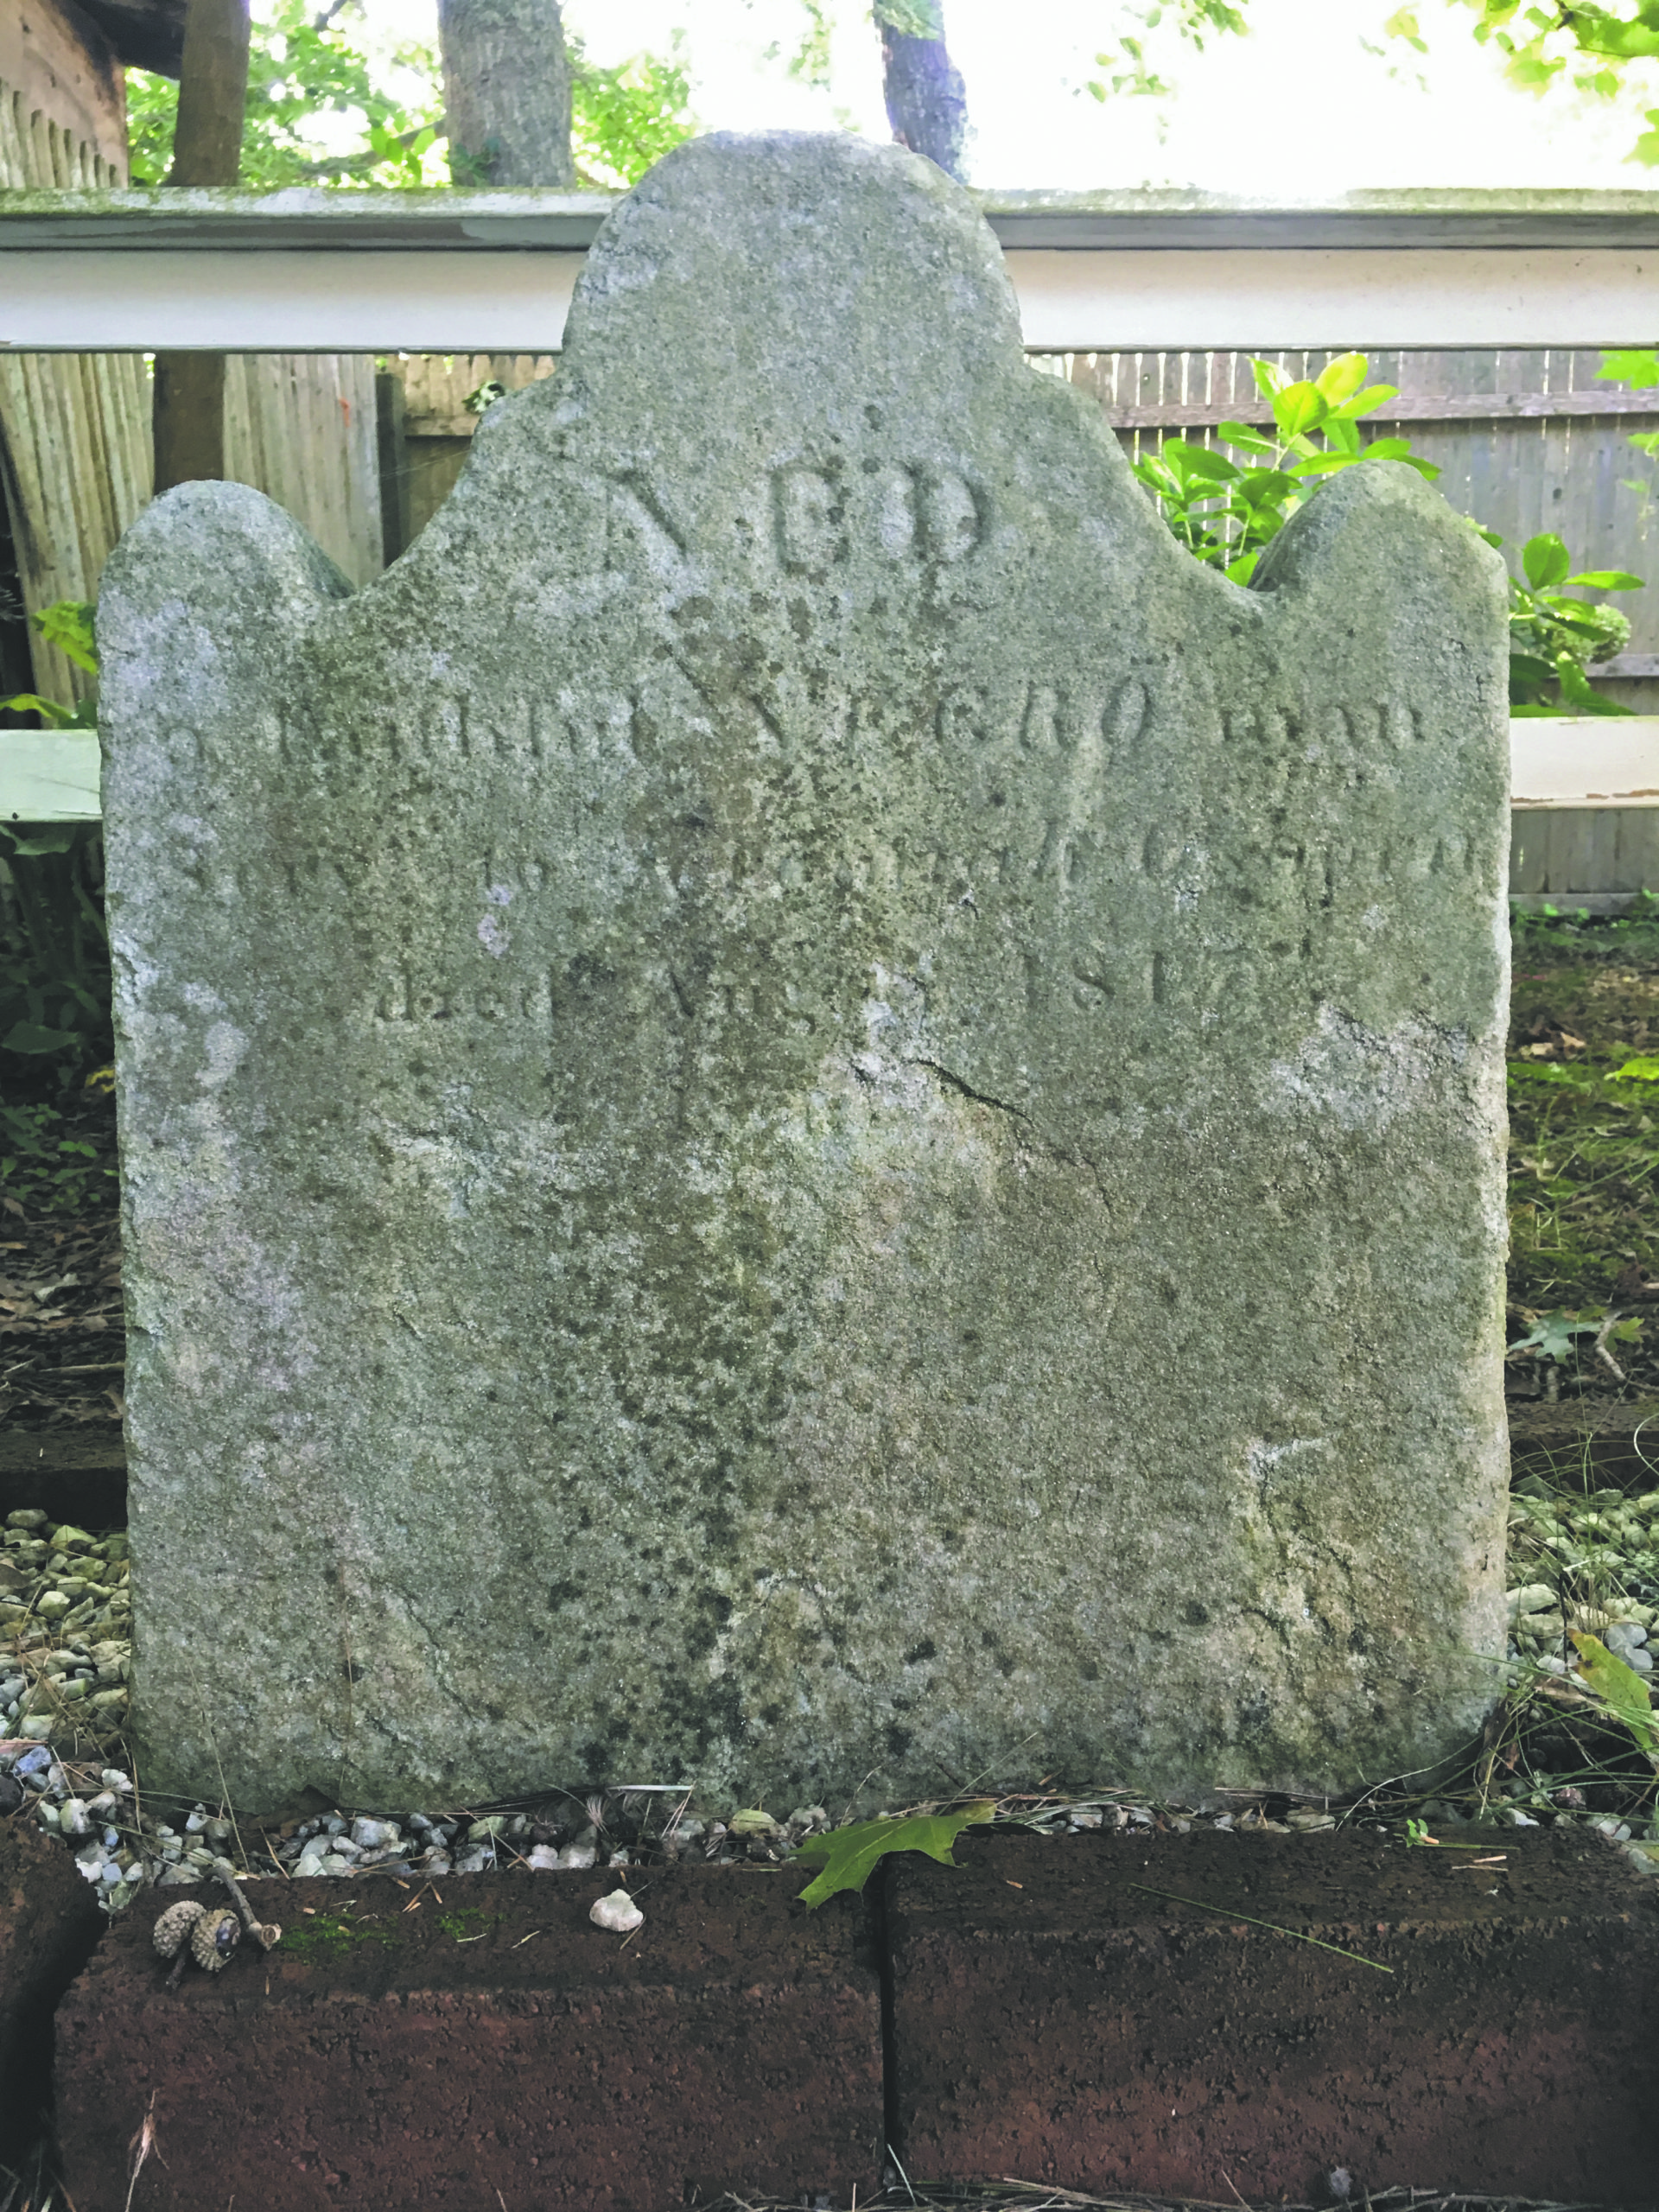 Ned is one of only two to have the only known headstones for people who had been enslaved in the Town of East Hampton, out of hundreds who we now know lived here.
                                           Courtesy Plain Sight Project                                          Courtesy Plain Sight Project